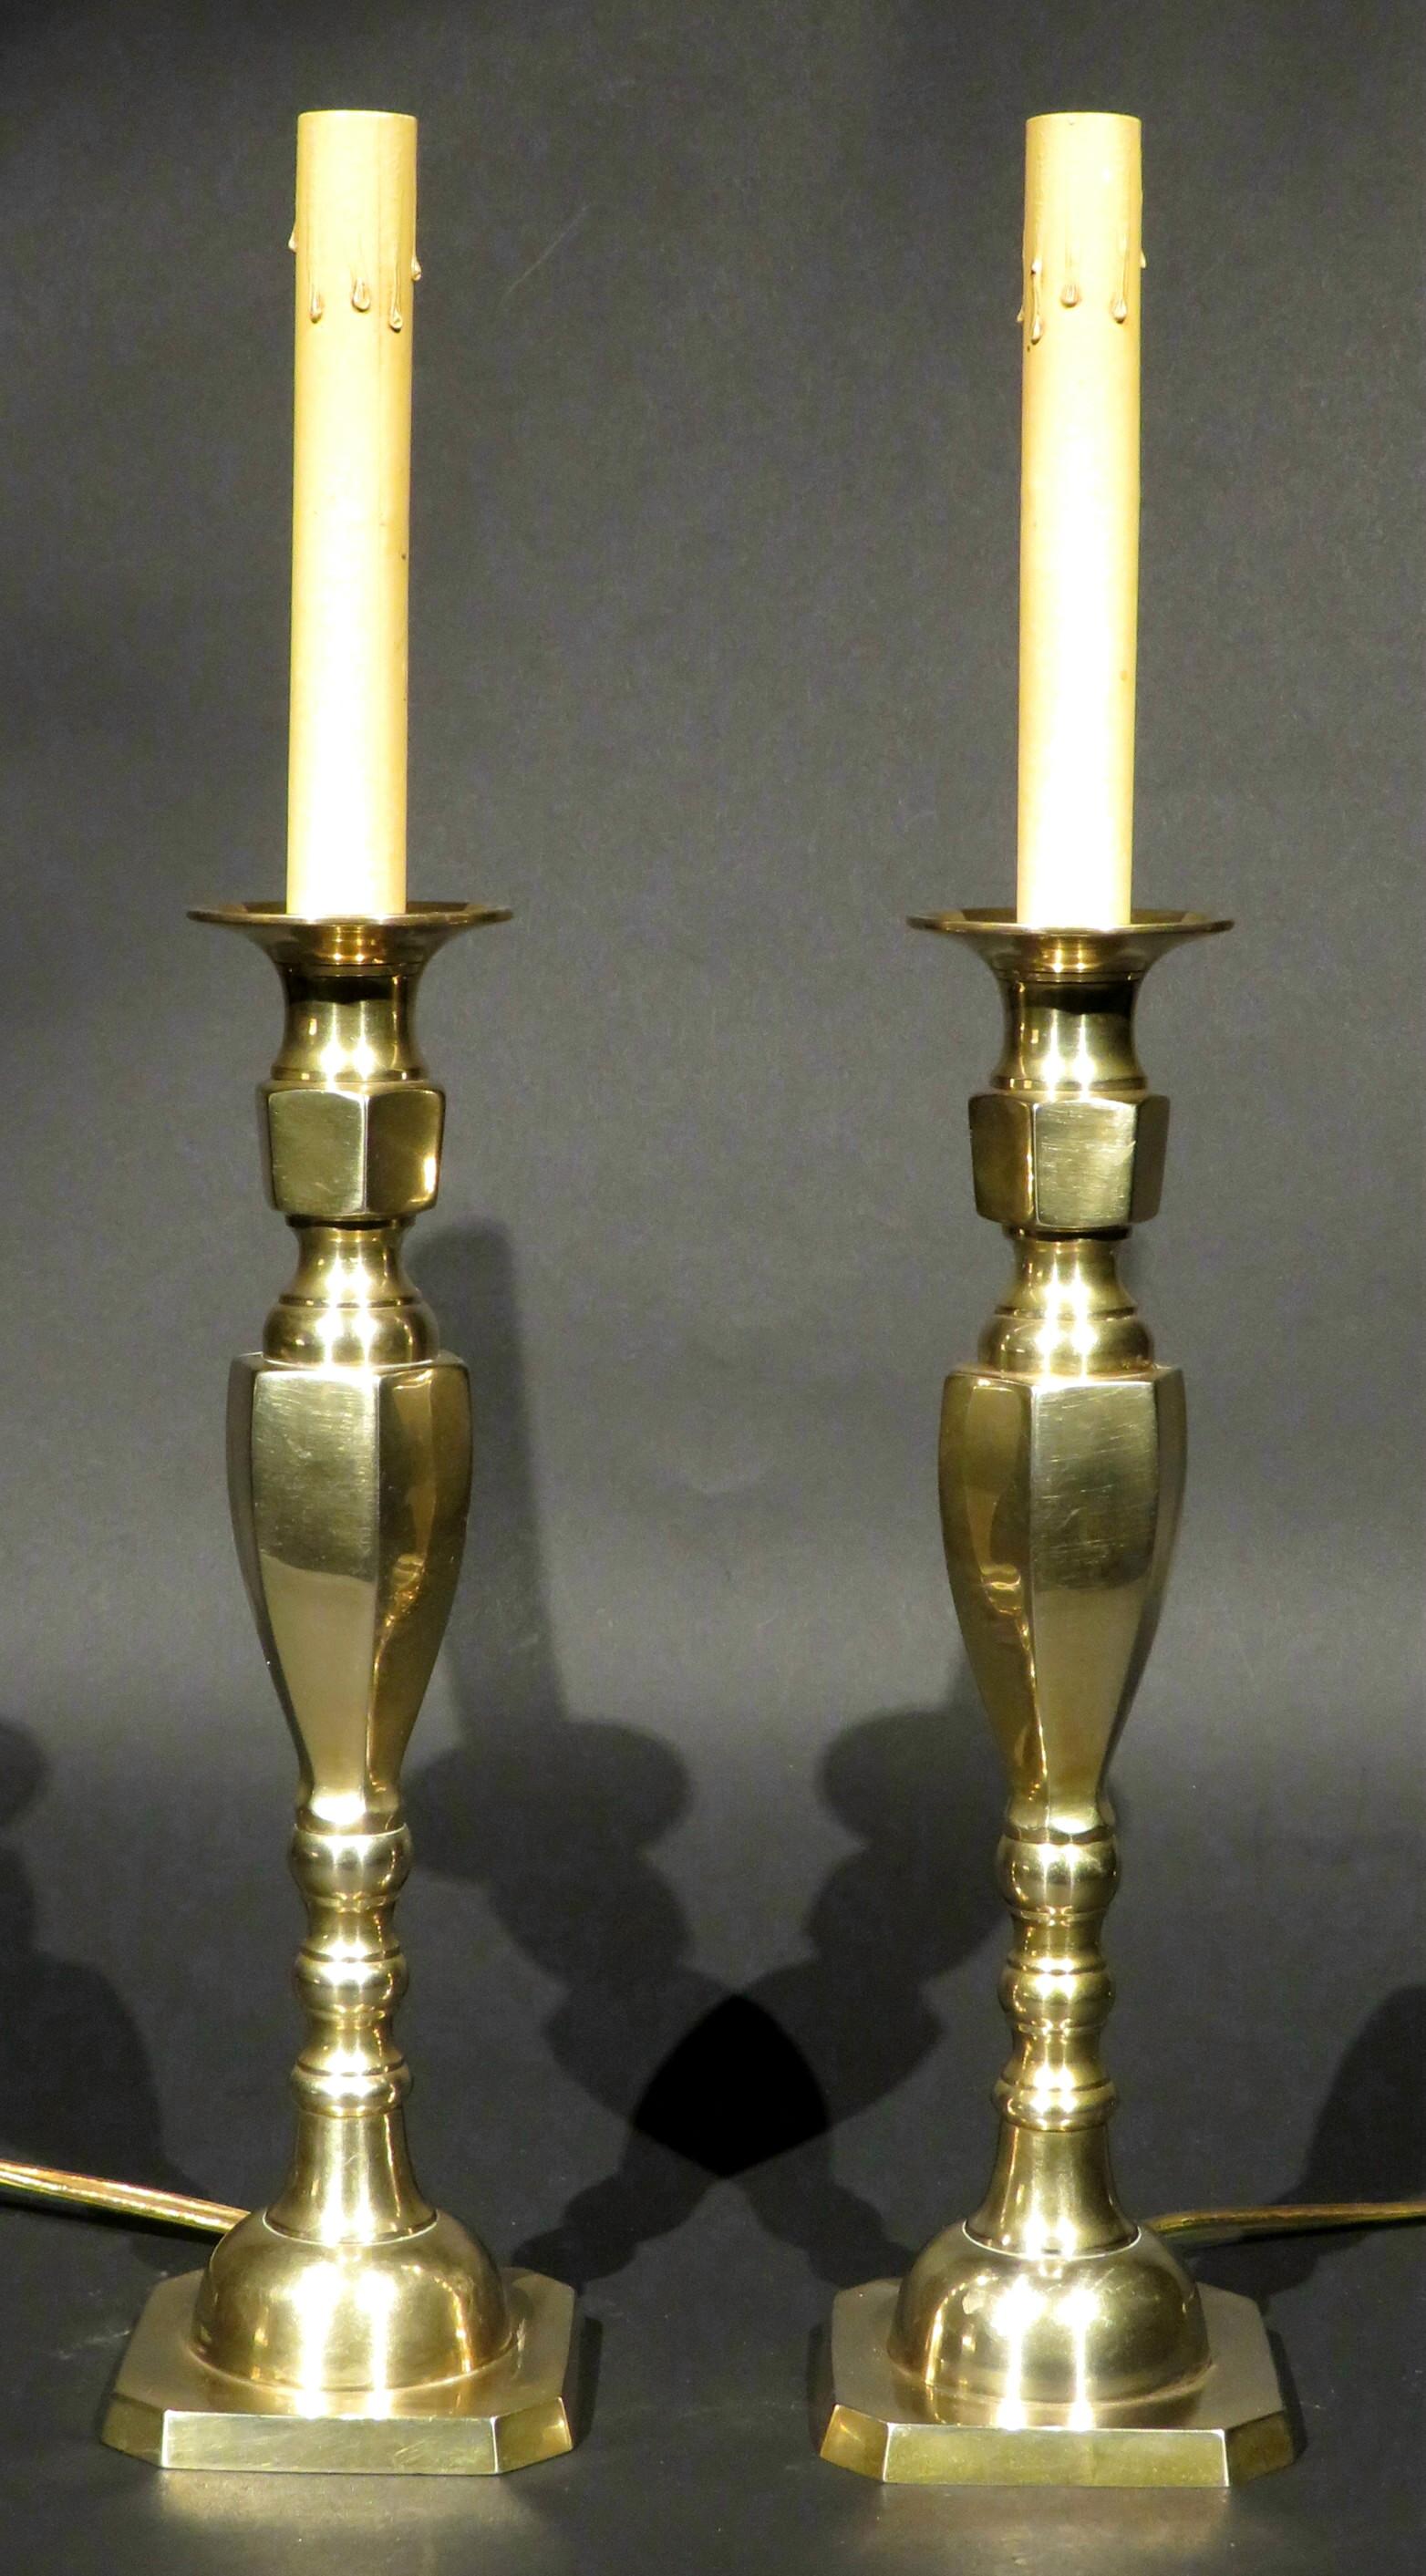 Both showing faceted columns rising to conforming nozzles, raised overall upon squared bases with canted corners. Fitted with complimentary black paper shades with gilt lined interiors.
Height, 17